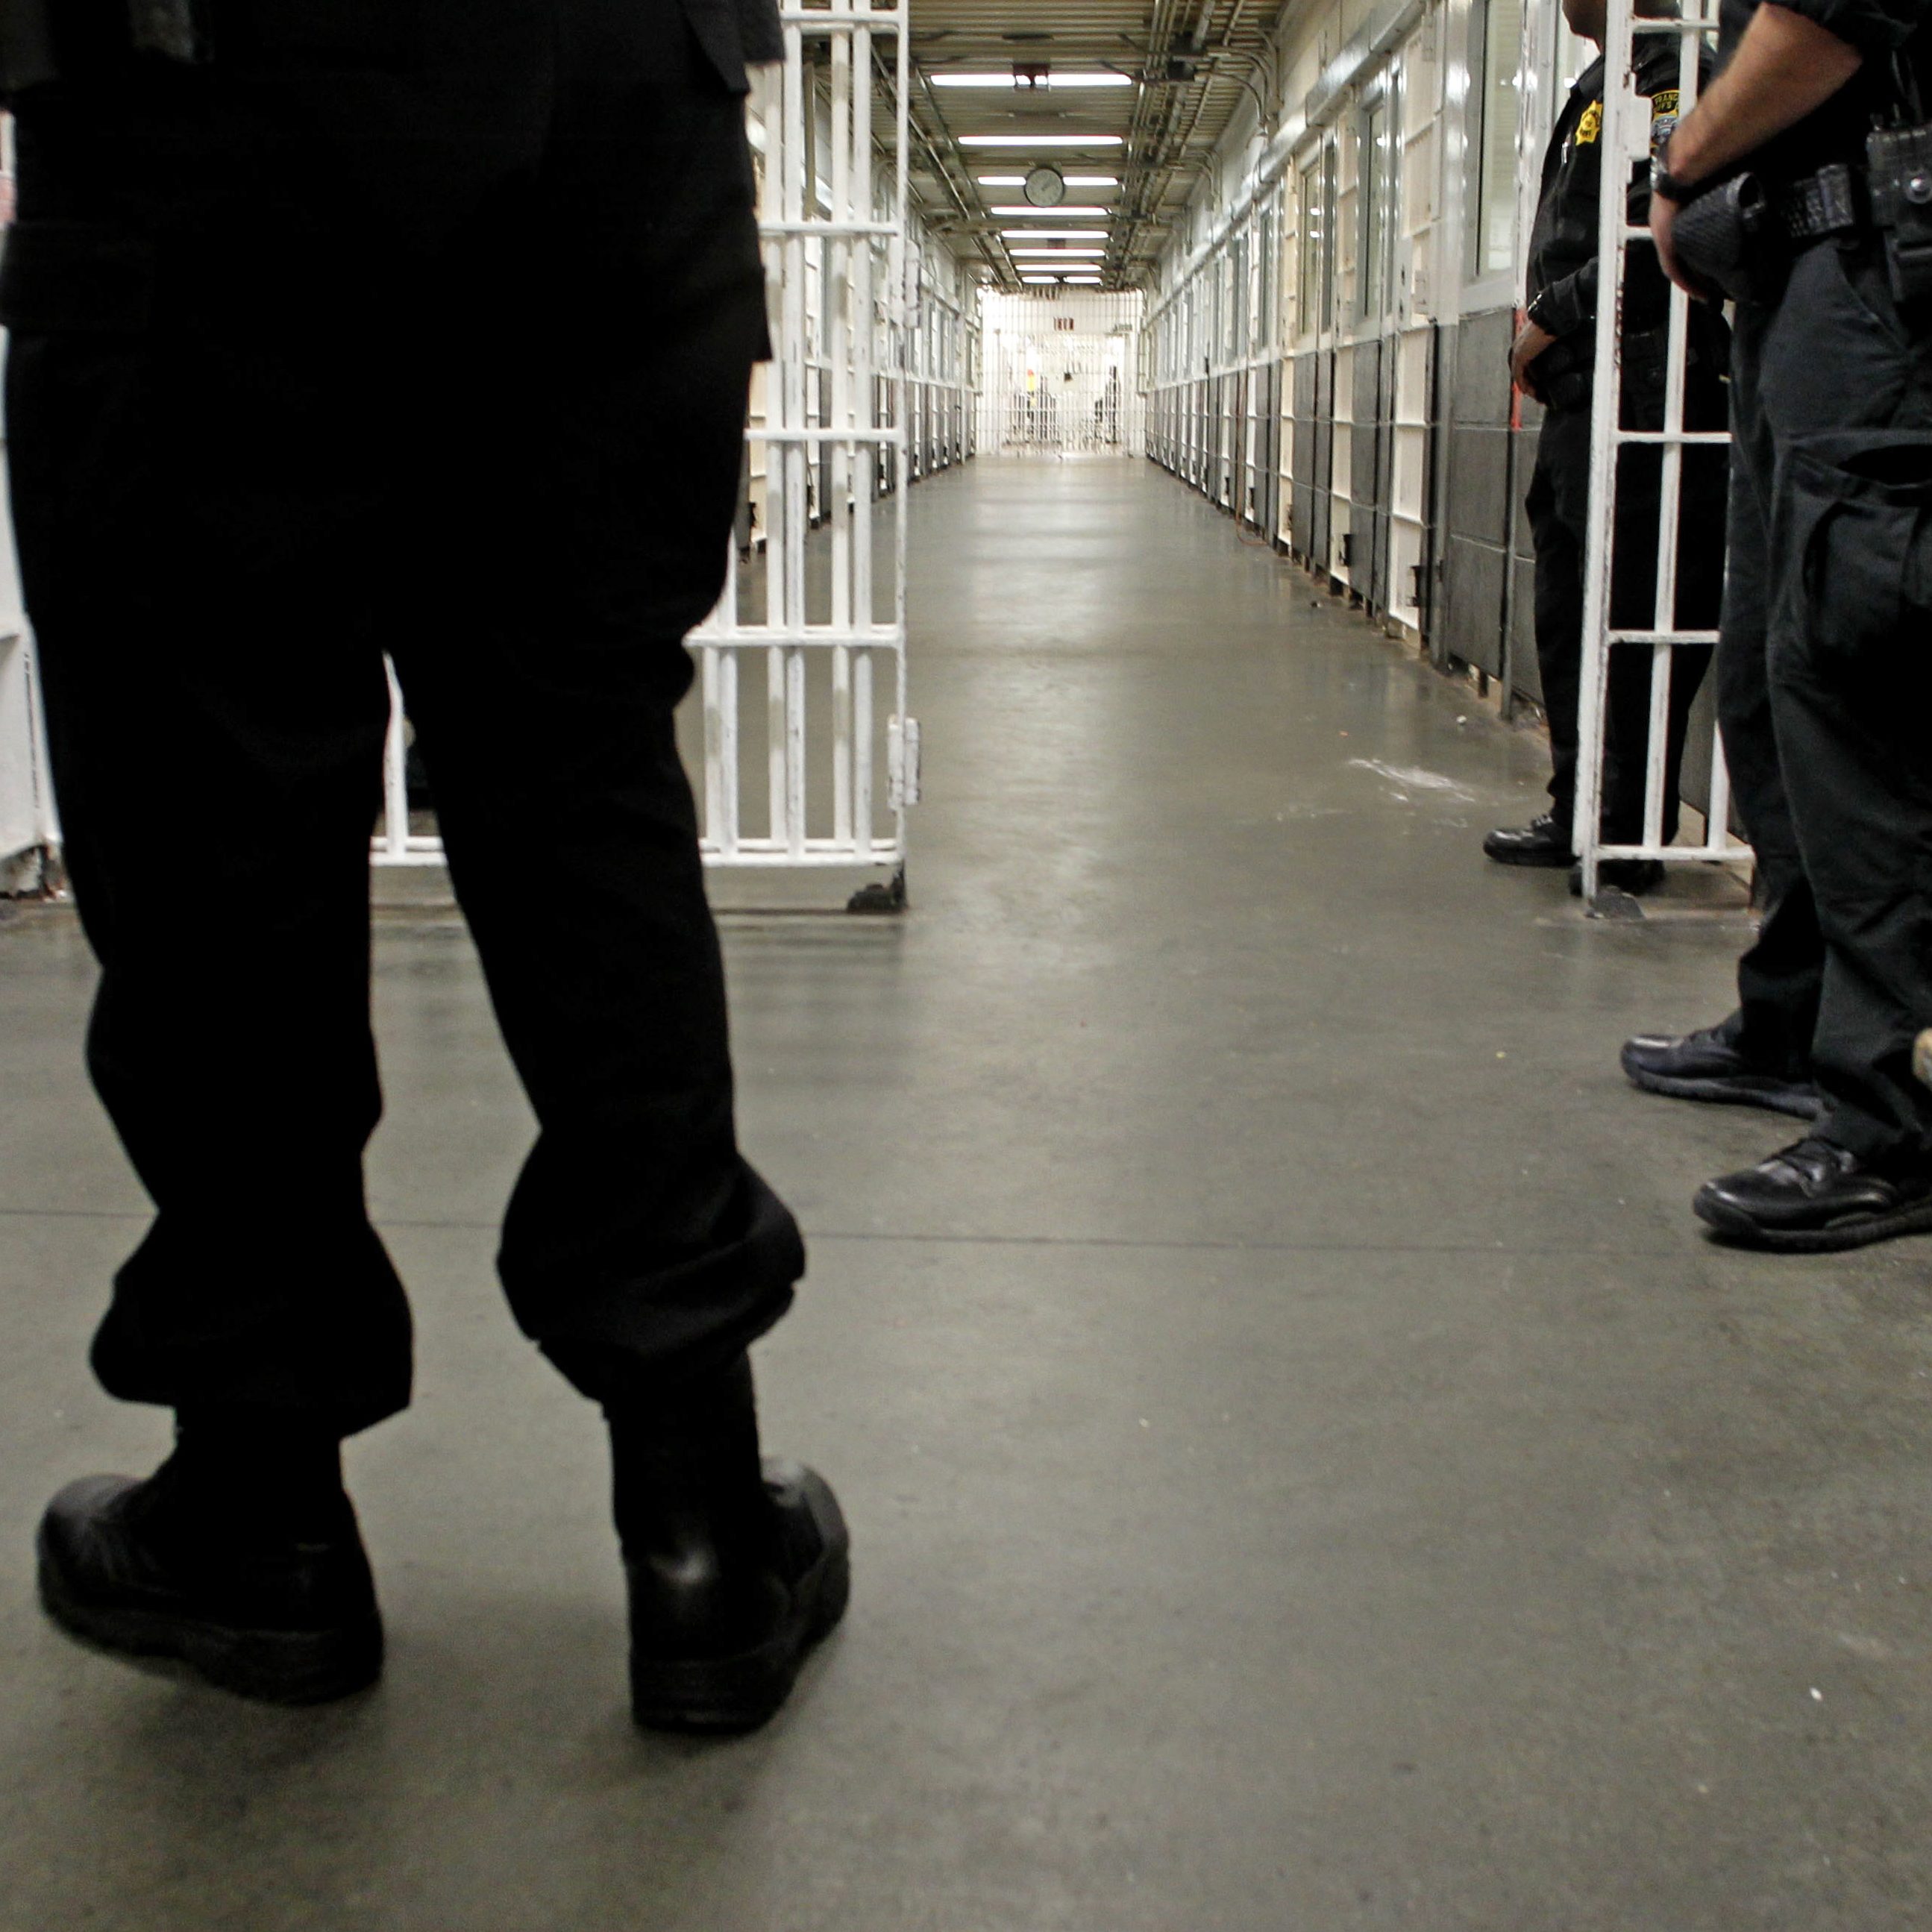 The image shows a corridor within a prison, lined with cells on both sides and guarded by officers in black uniforms. The ground is concrete, and the lighting is fluorescent.